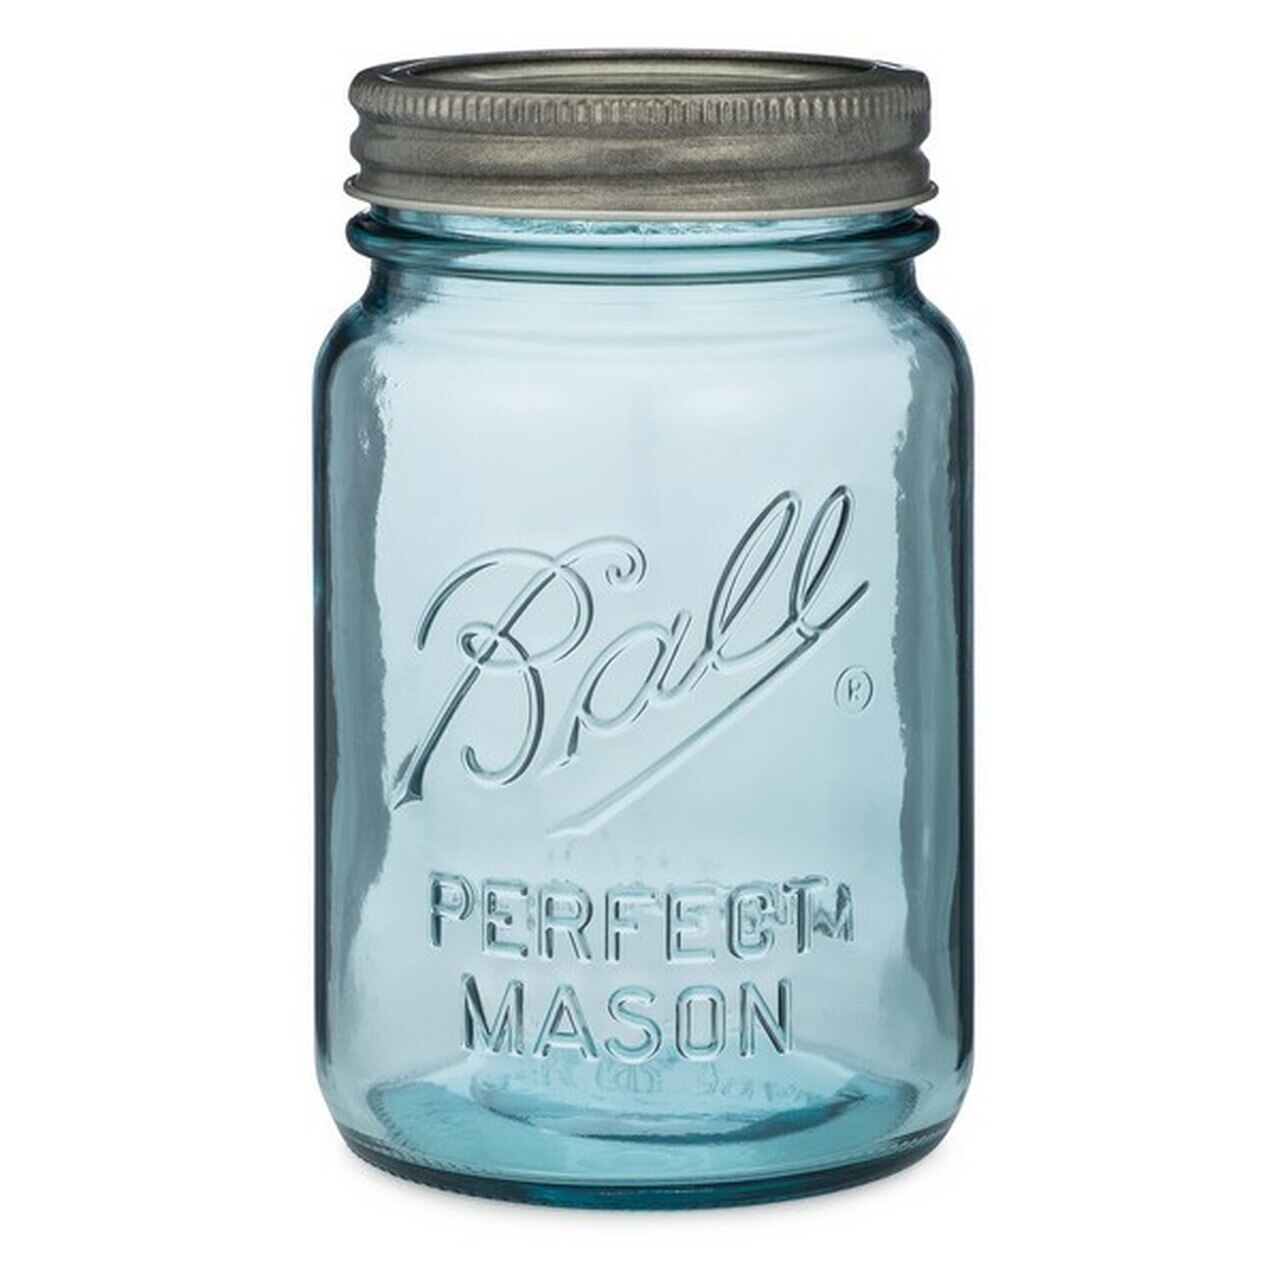 how to tell if a mason jar is valuable: you might have a $1,000 jar